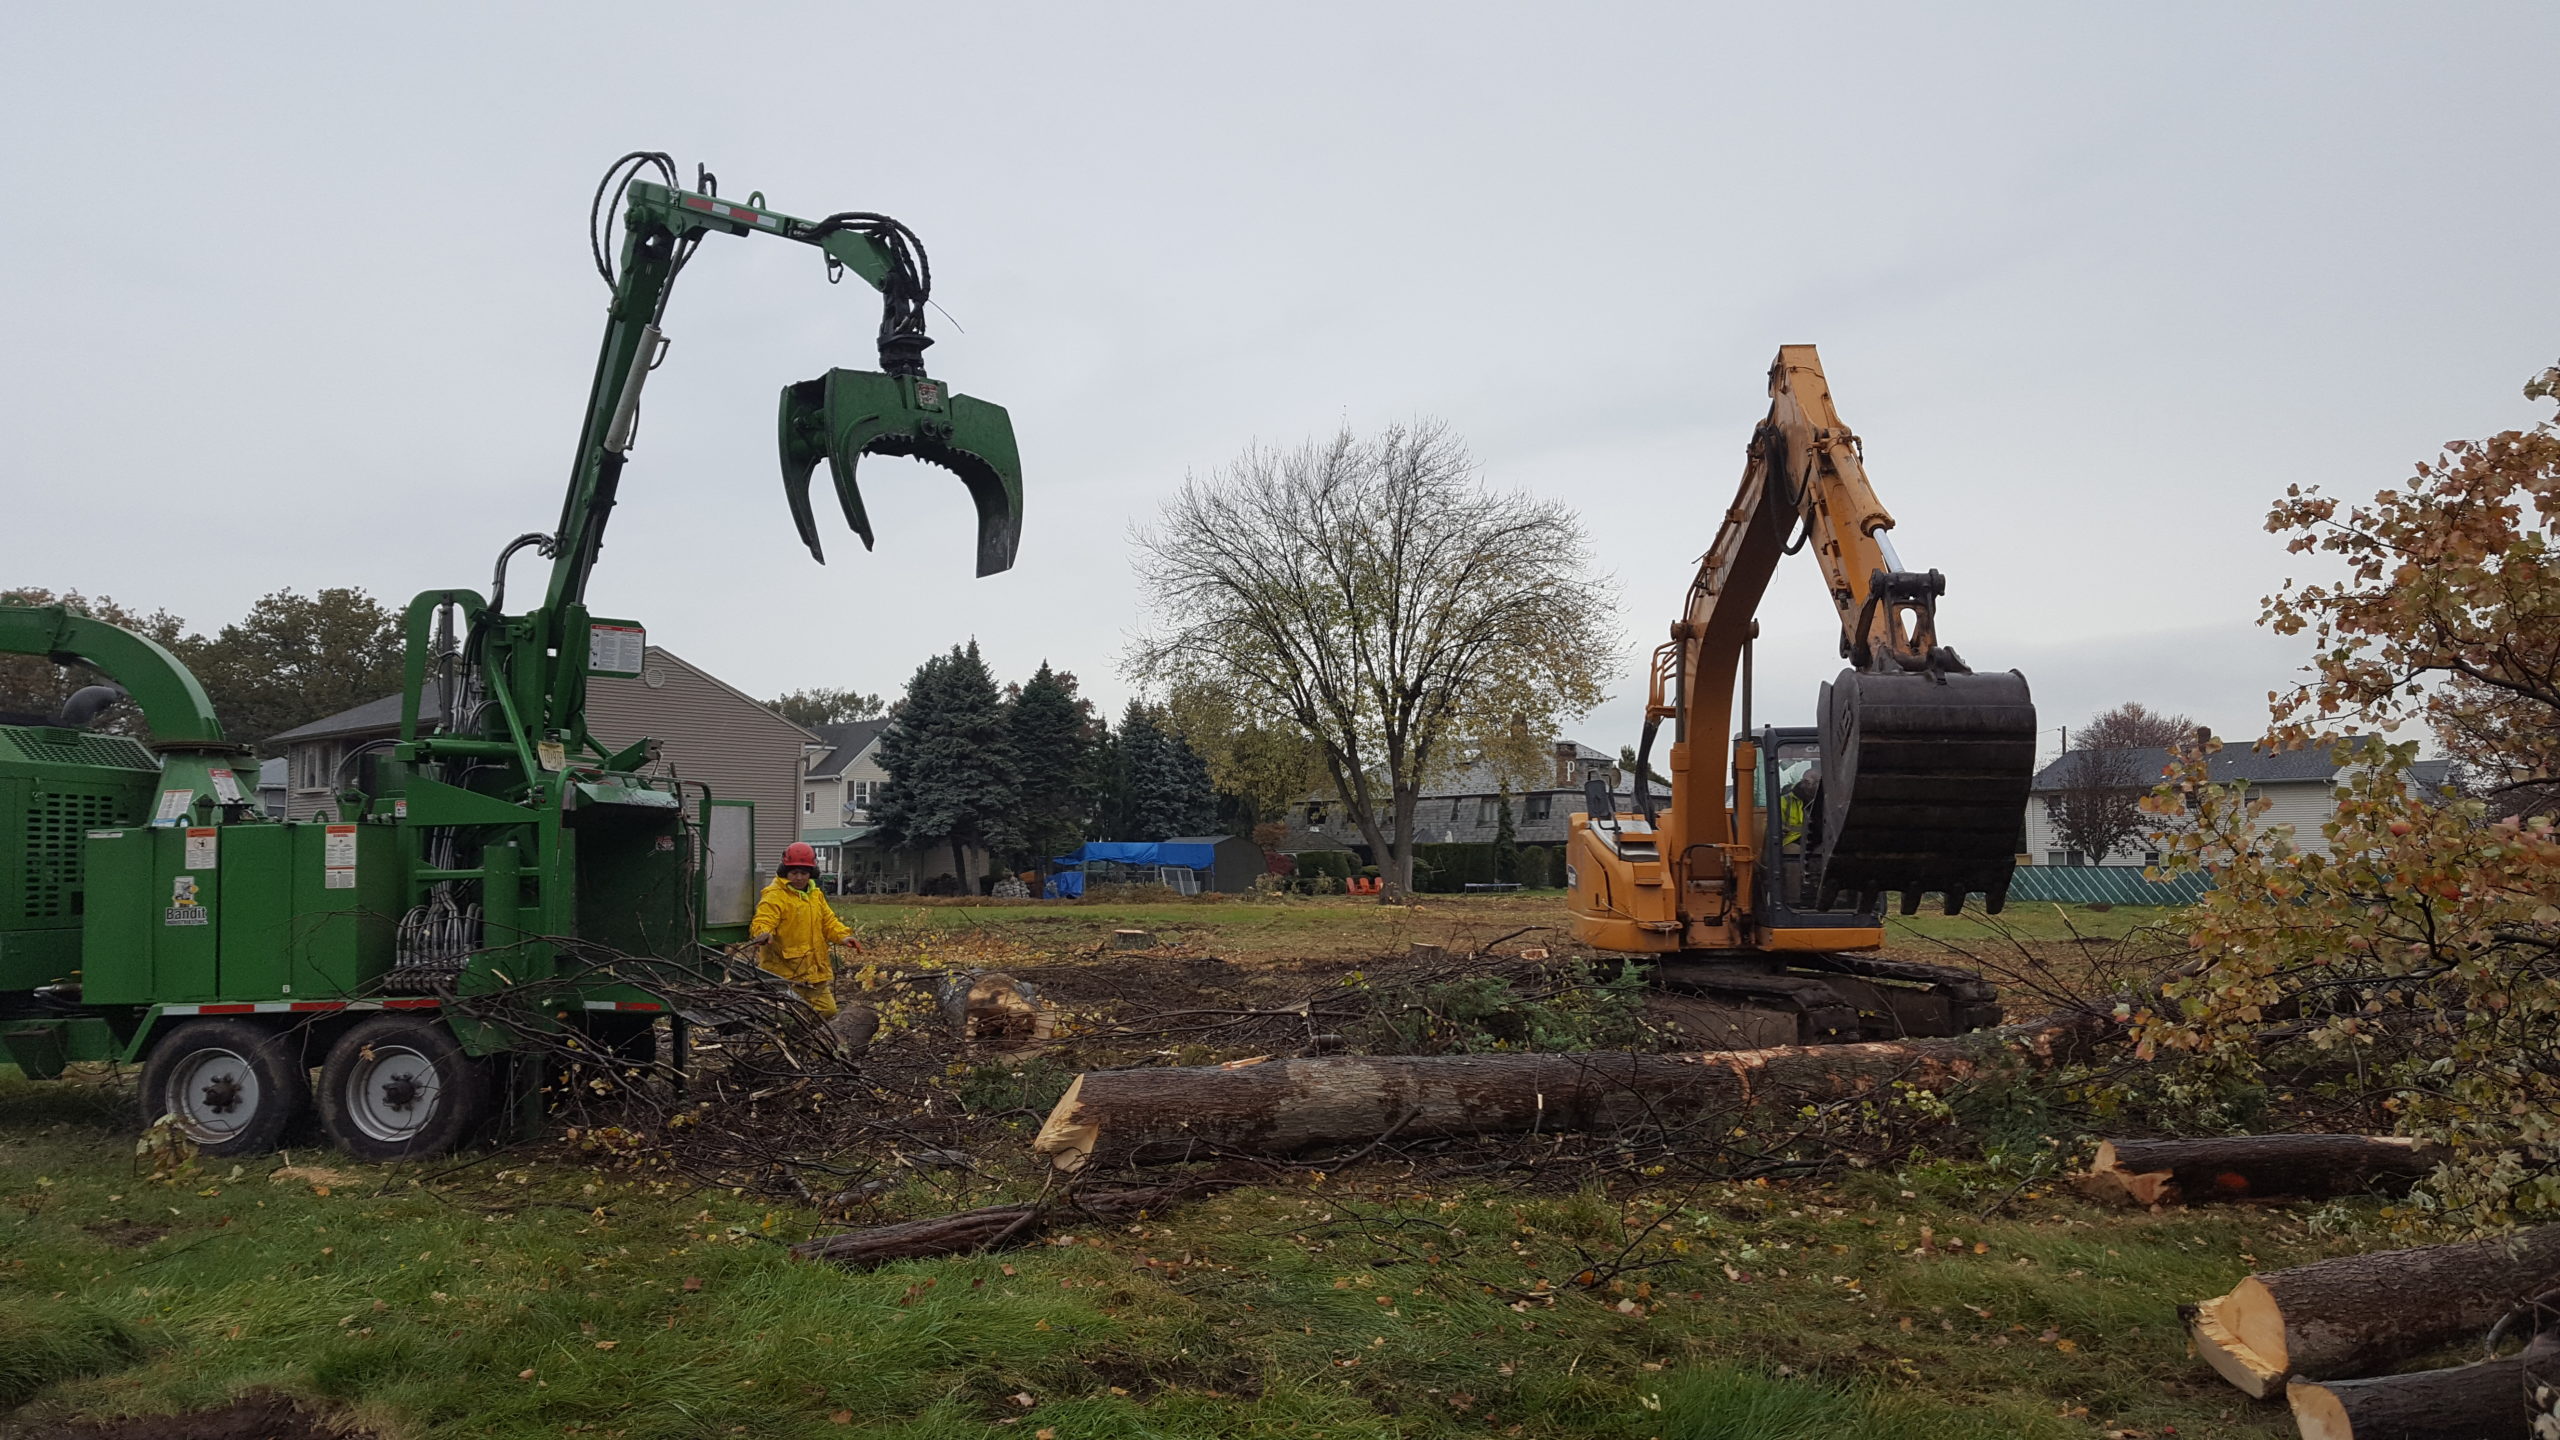 Cranes and Tree Trunks - NJ Land Clearing Services